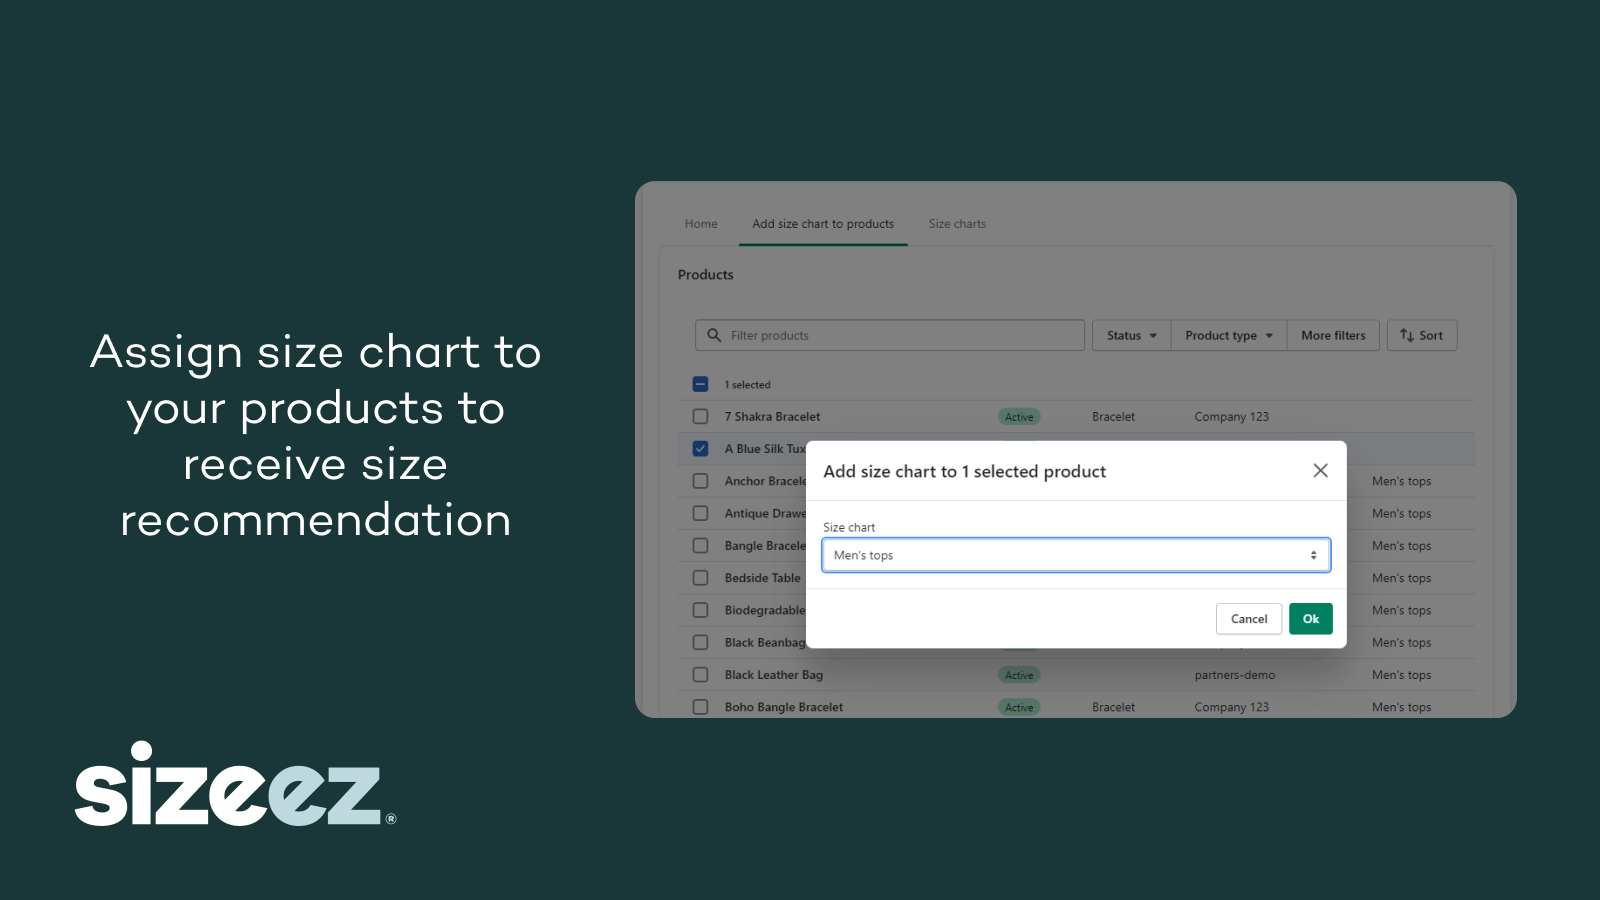 Assign size chart to your product to receive size recommendation